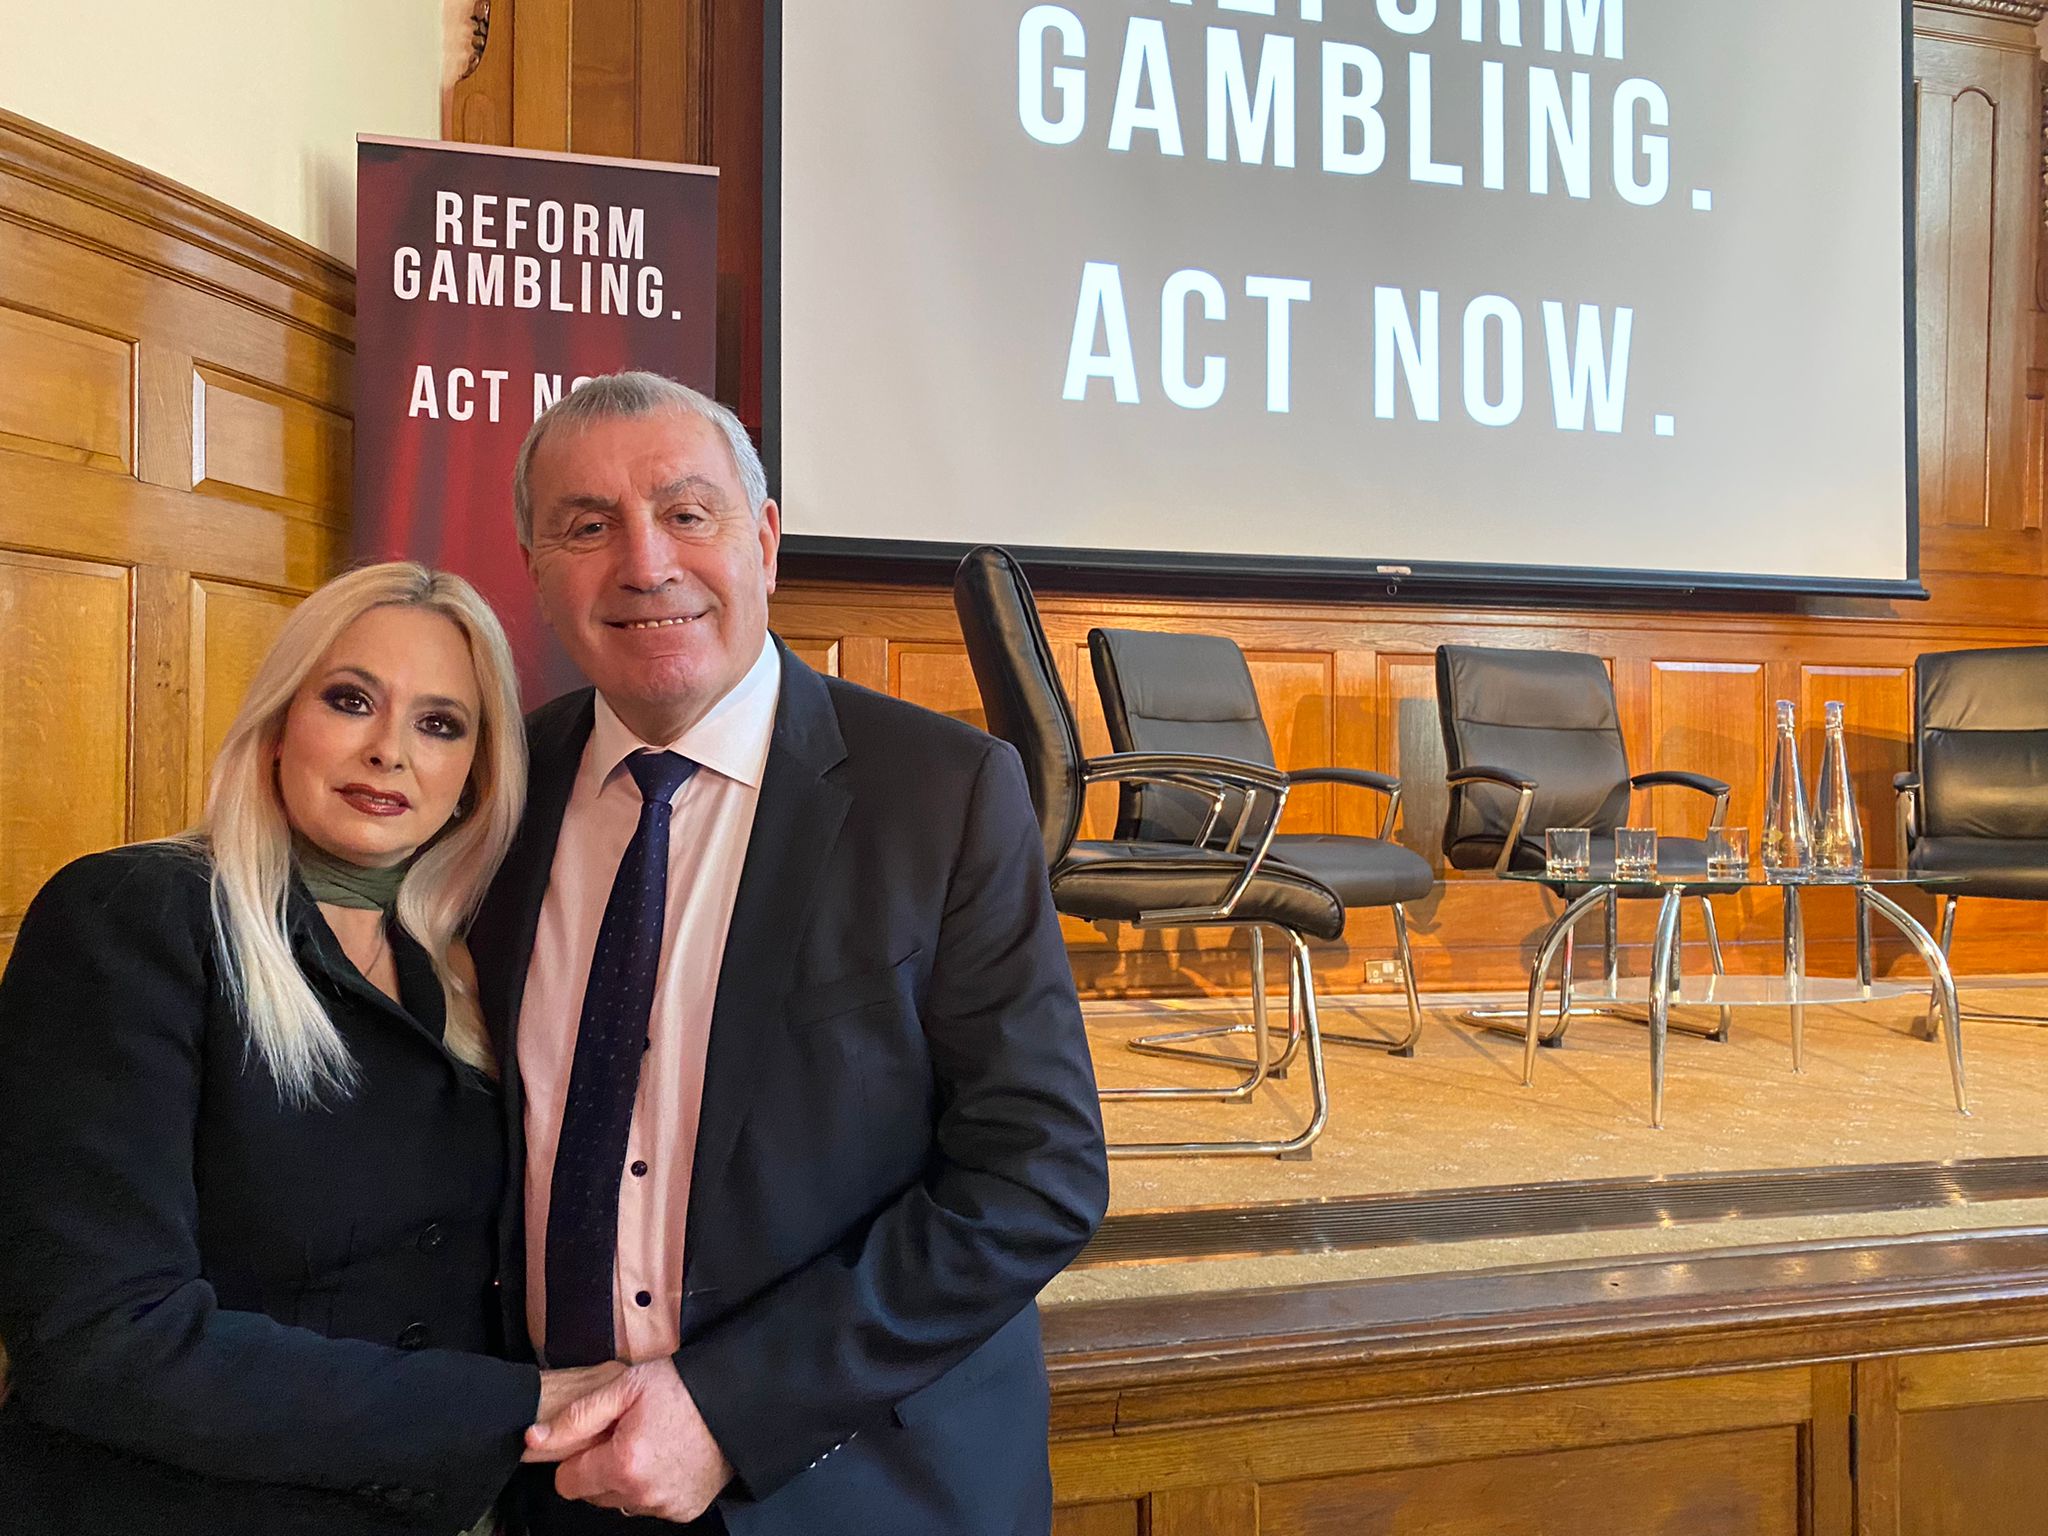 England legend makes urgent call for gambling law reform | Clacton and Frinton Gazette